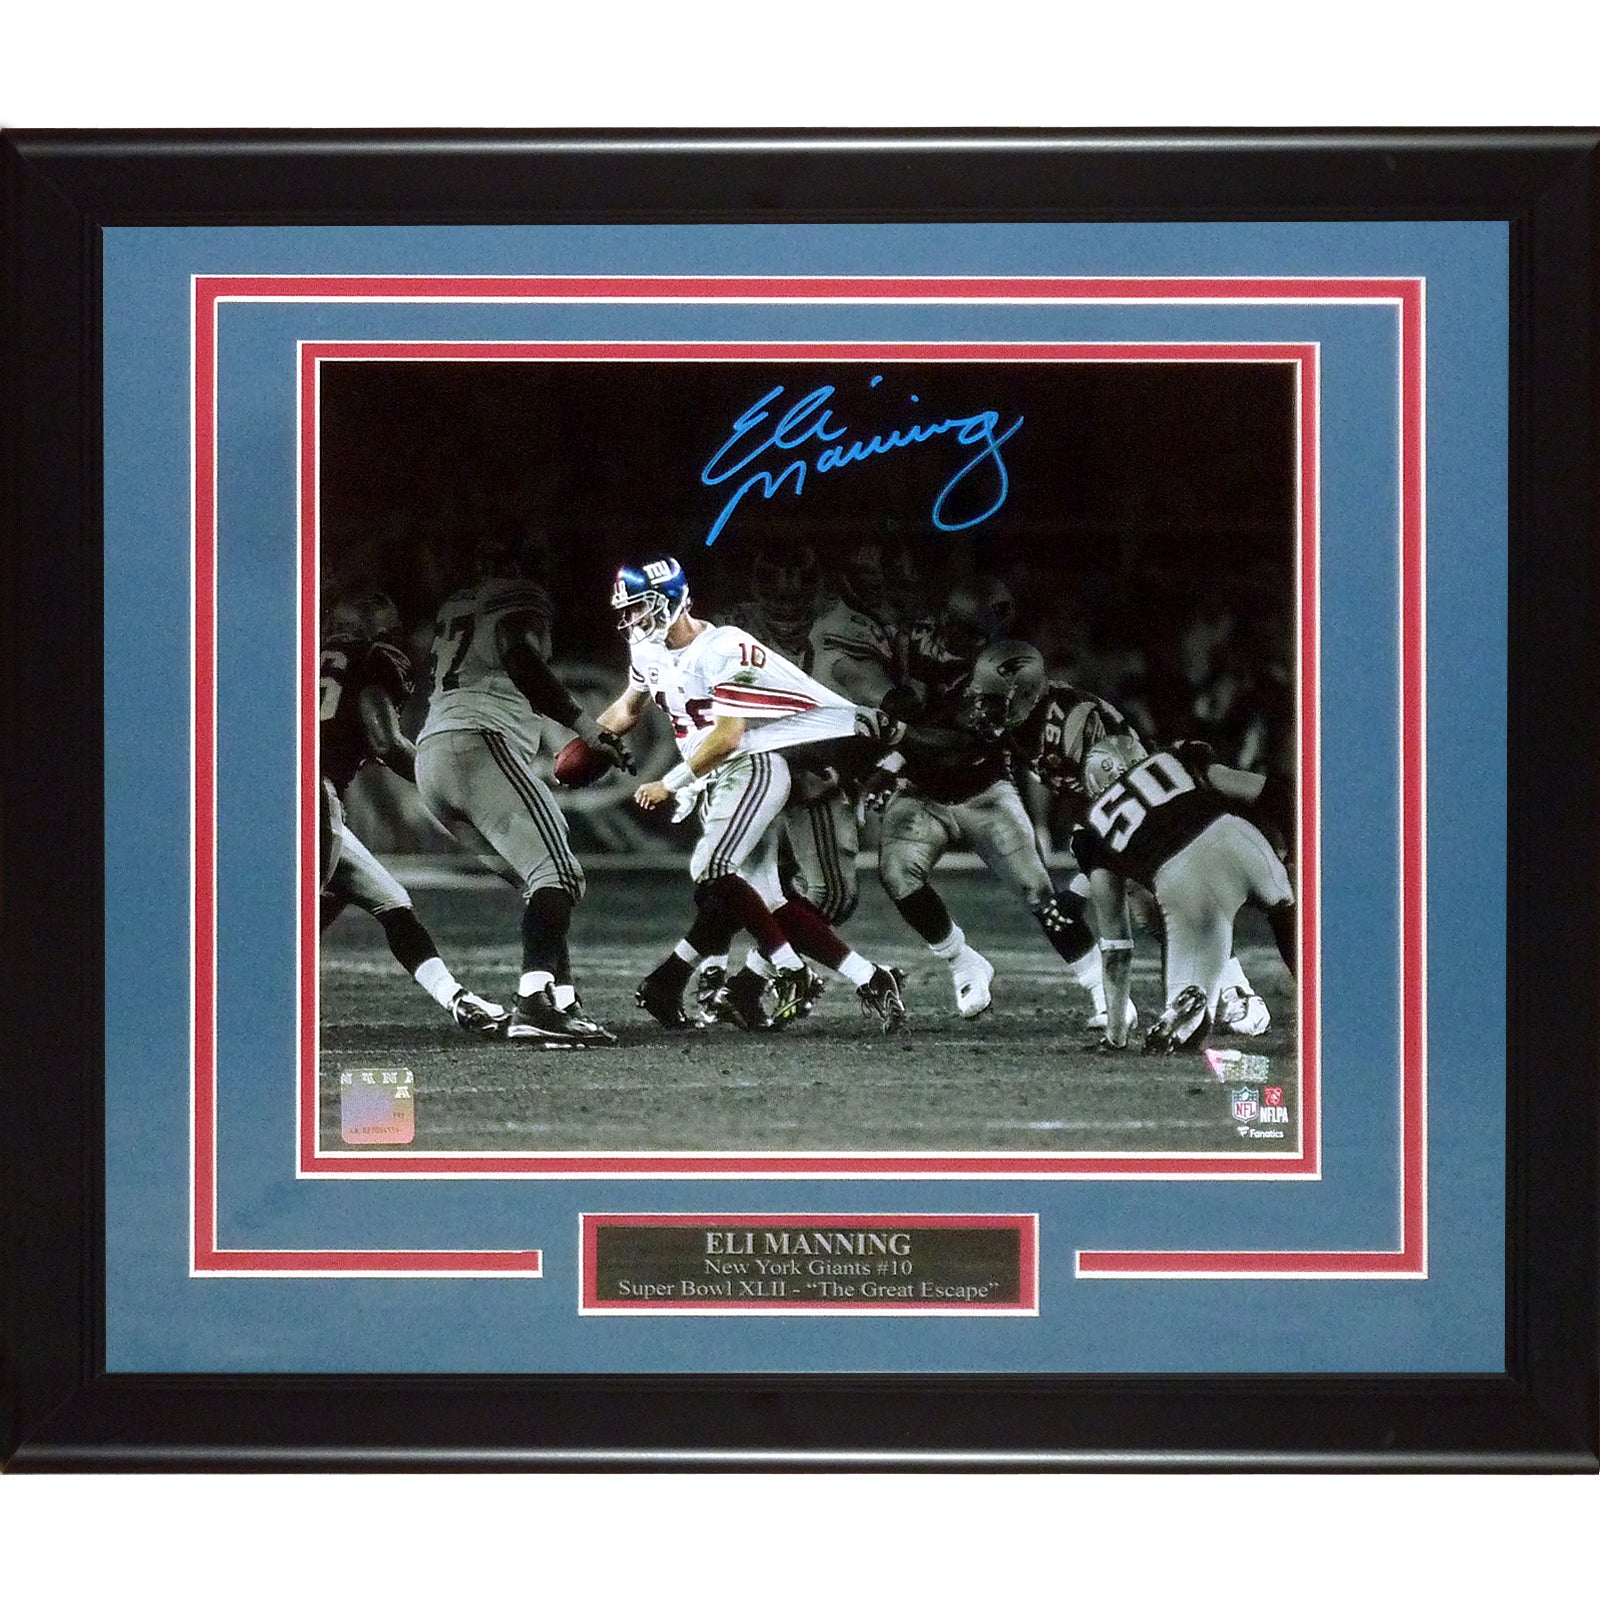 Eli Manning Autographed New York Giants (Super Bowl XLII Escape) Deluxe Framed 11x14 Photo